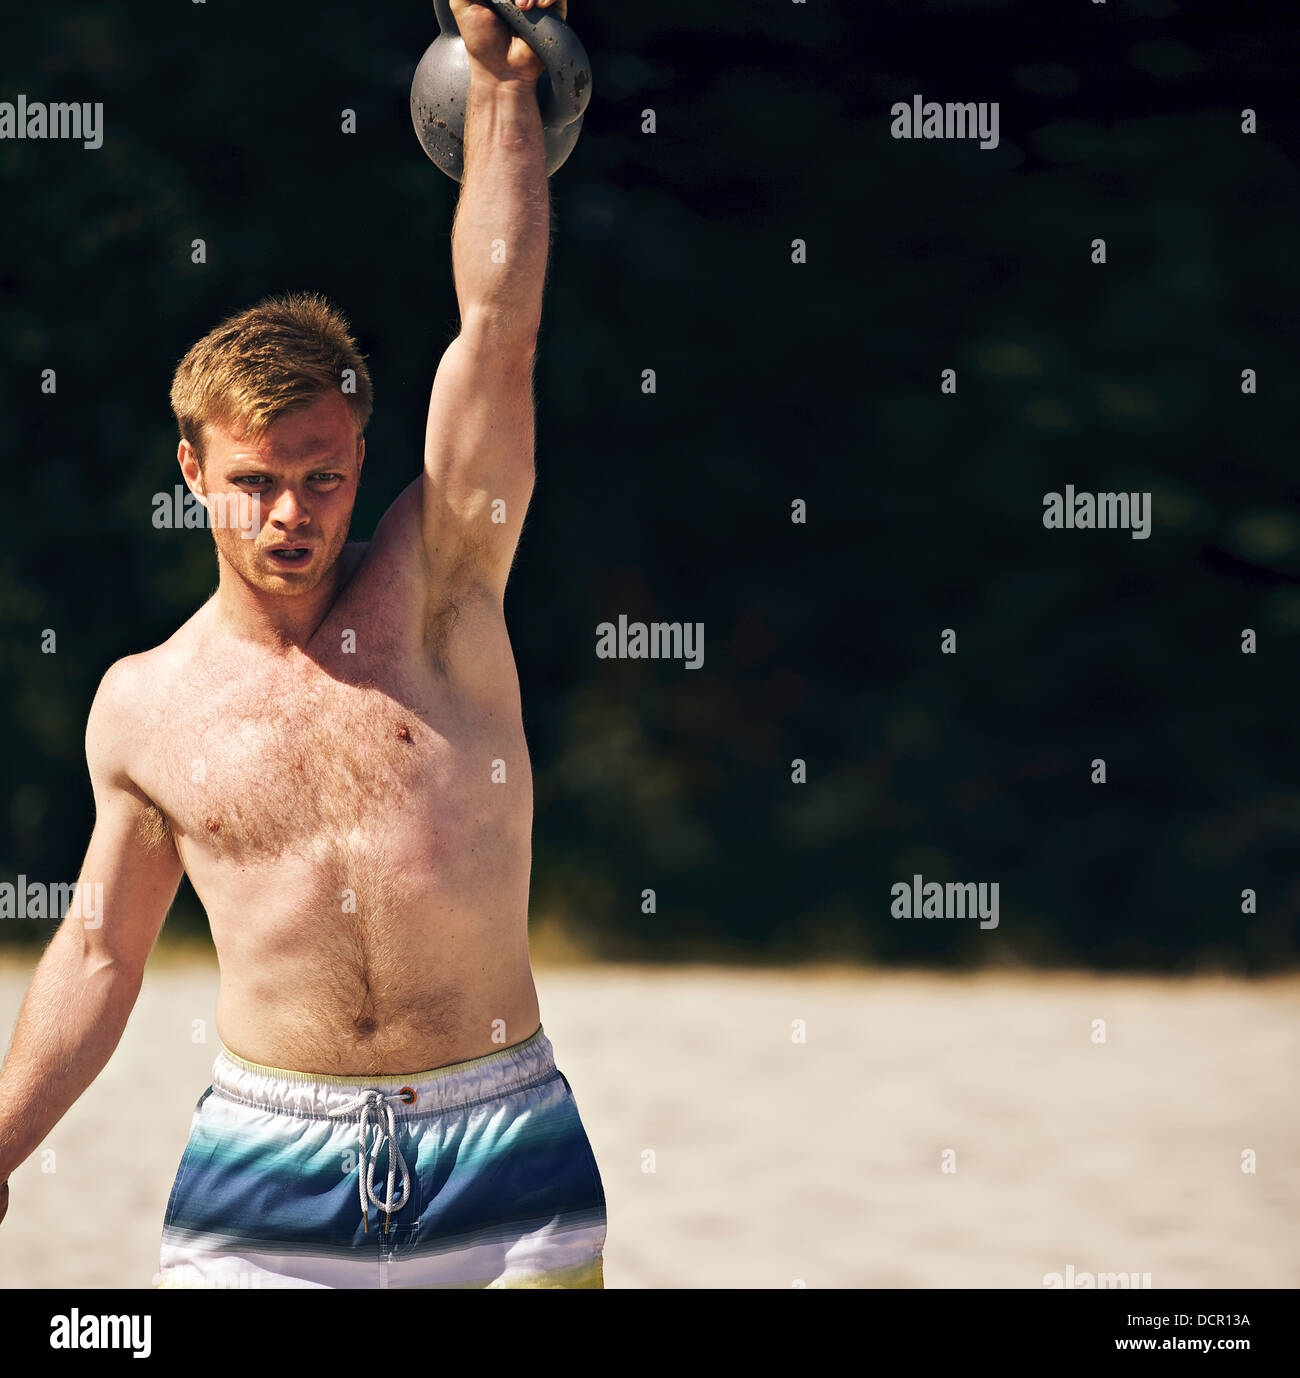 Guy lifting a heavy kettlebell on a beach during crossfit workout. Copy space right. Stock Photo